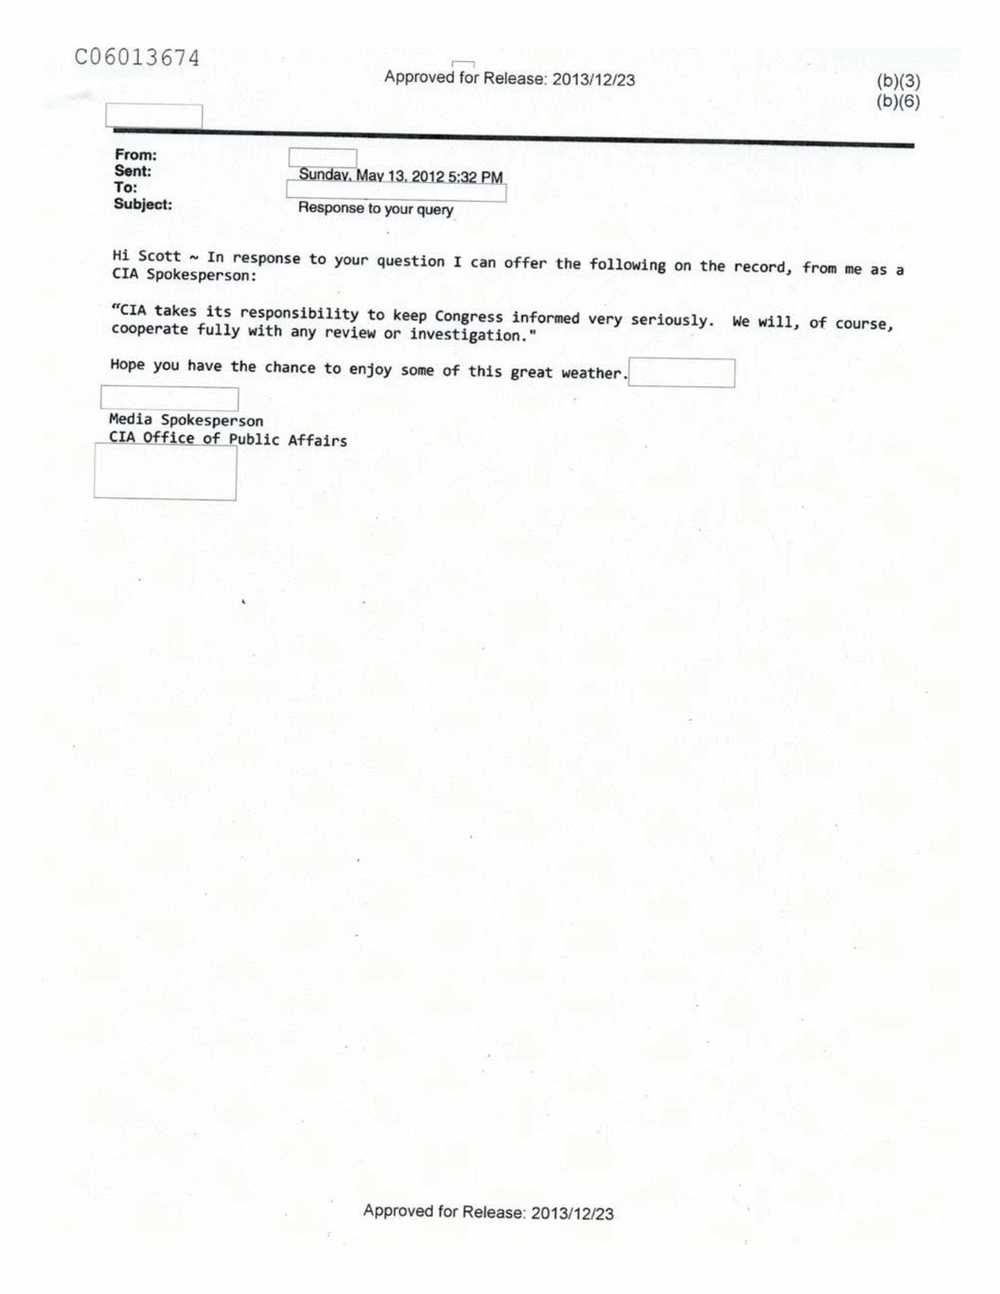 Page 526 from Email Correspondence Between Reporters and CIA Flacks